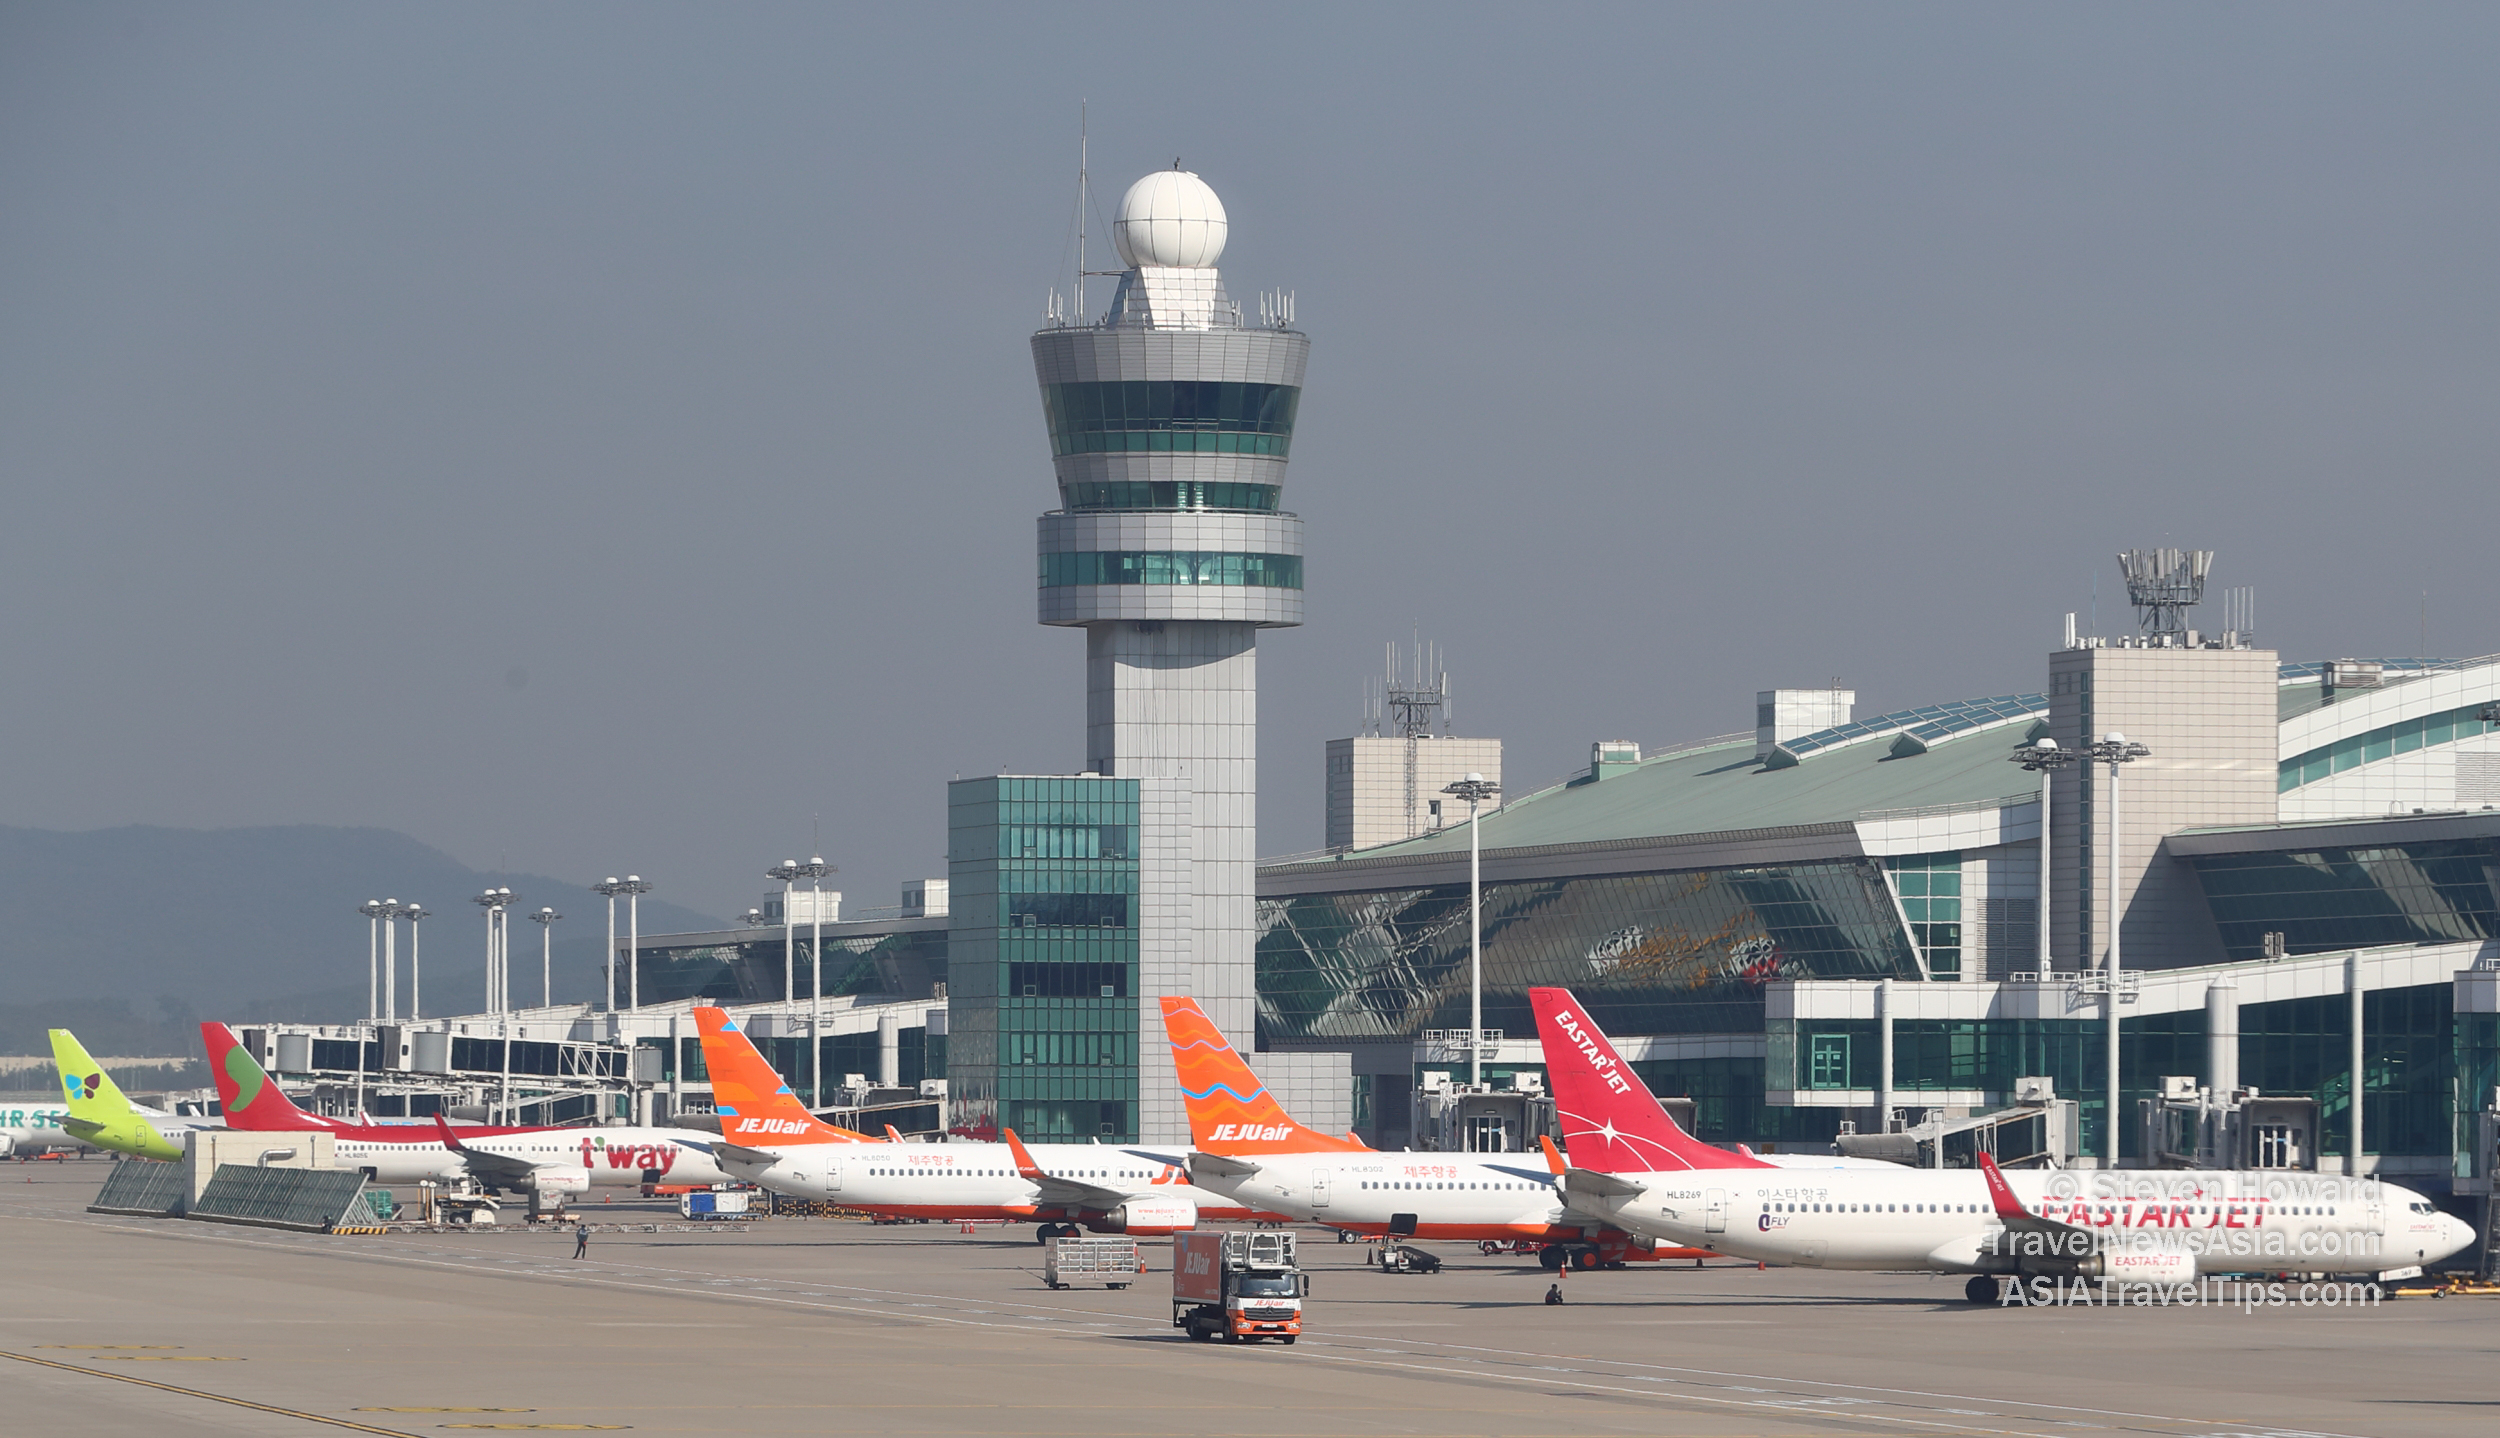 Aircraft at Incheon International Airport in Seoul, South Korea on 20 October 2018. Picture by Steven Howard of TravelNewsAsia.com Click to enlarge.